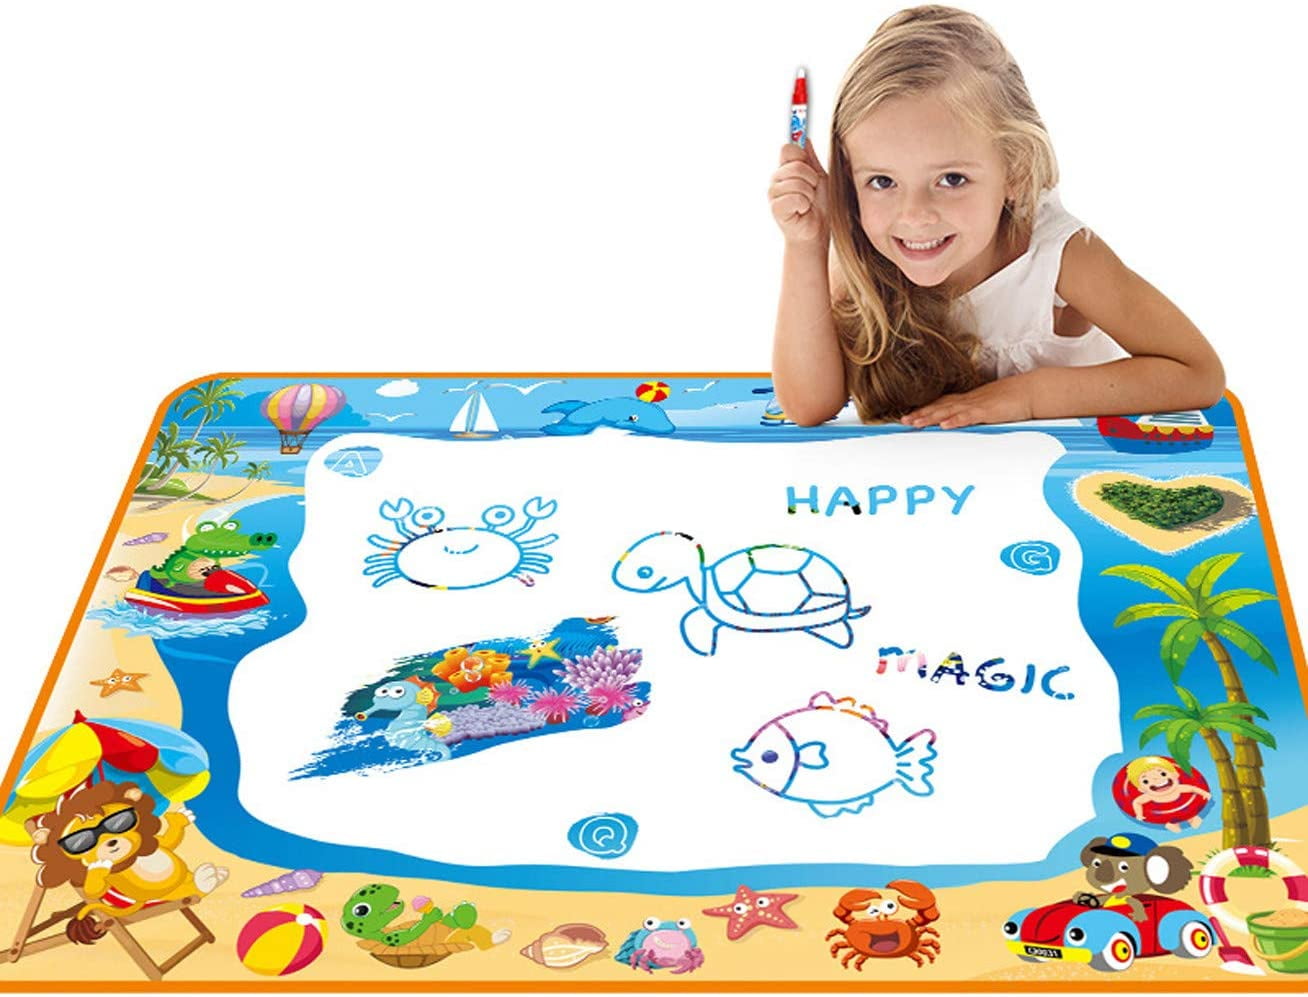 Magic Water Doodle Drawing Mat Toddler Gifts Toys For 2 3 4 Year Old Girls Boys Rainbow Multicolor Animal World Theme Educational Birthday Gifts Ideal Large Size 39.3 x 27.6 Inch 17pcs Accessories 